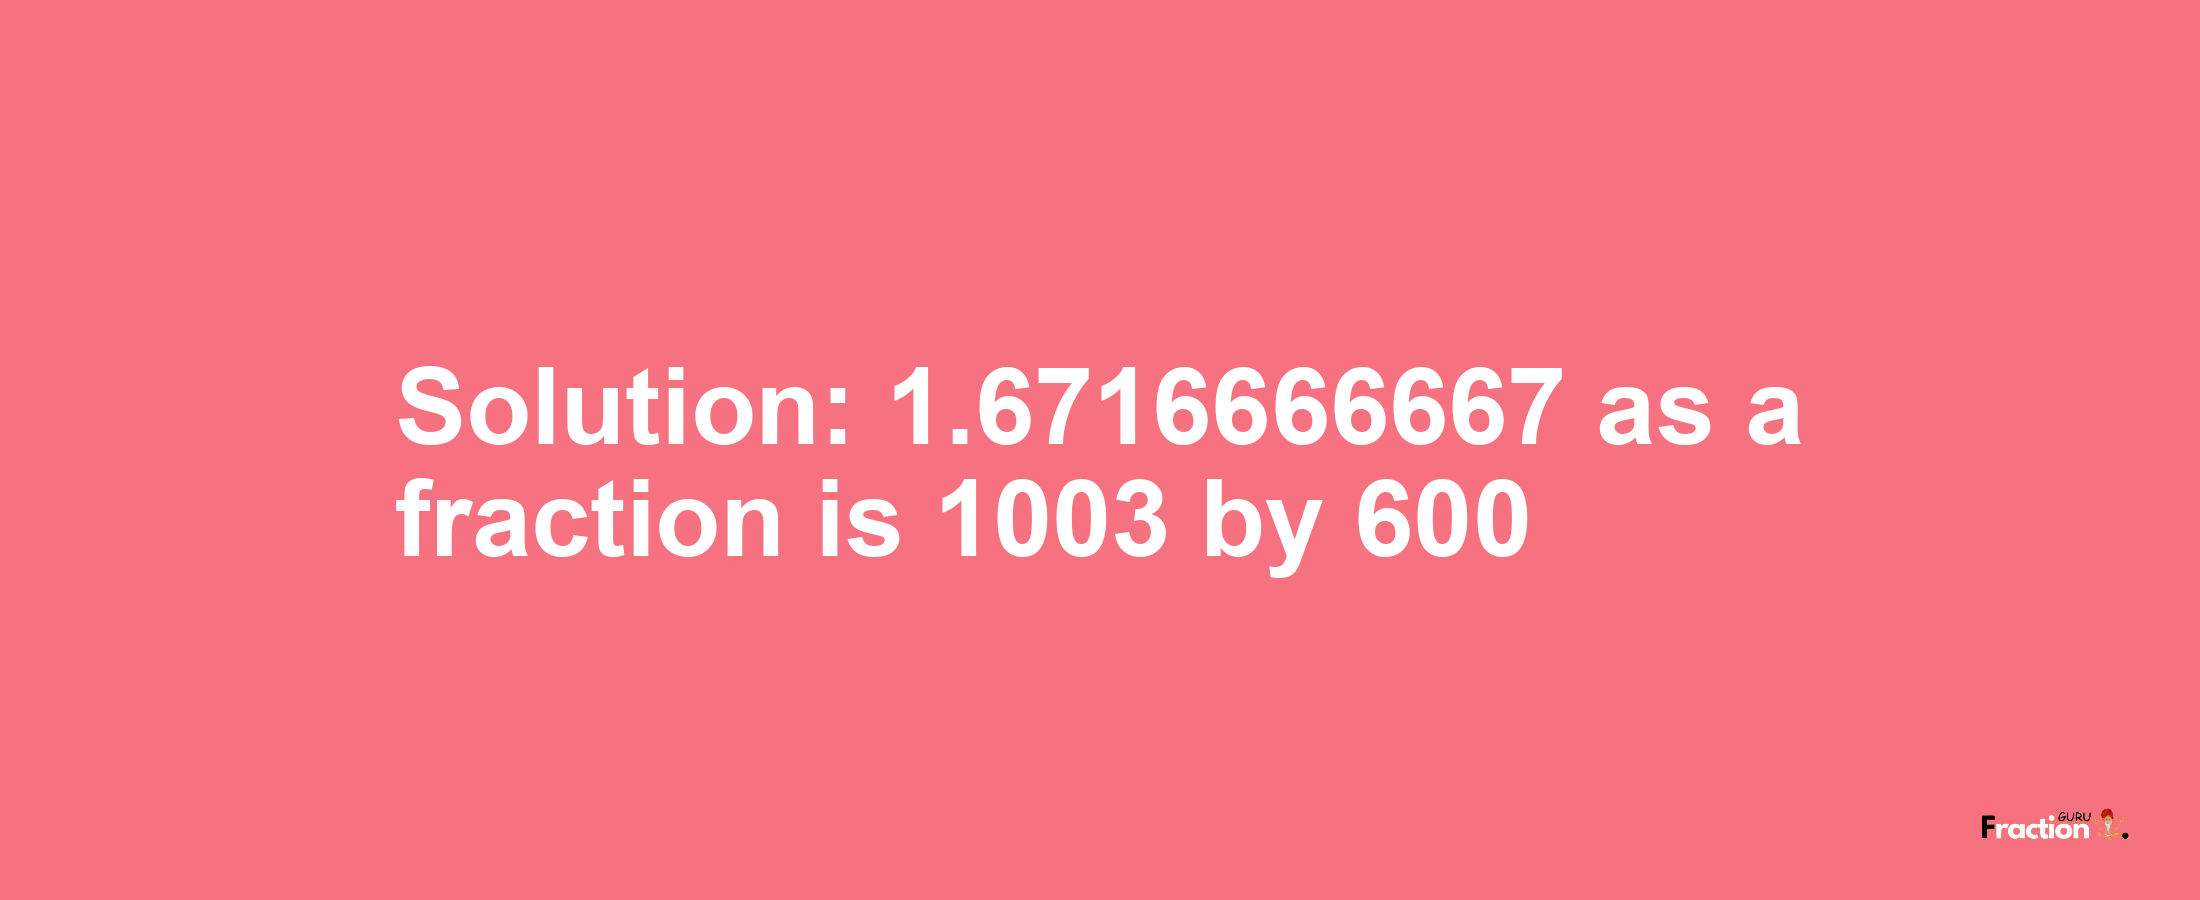 Solution:1.6716666667 as a fraction is 1003/600